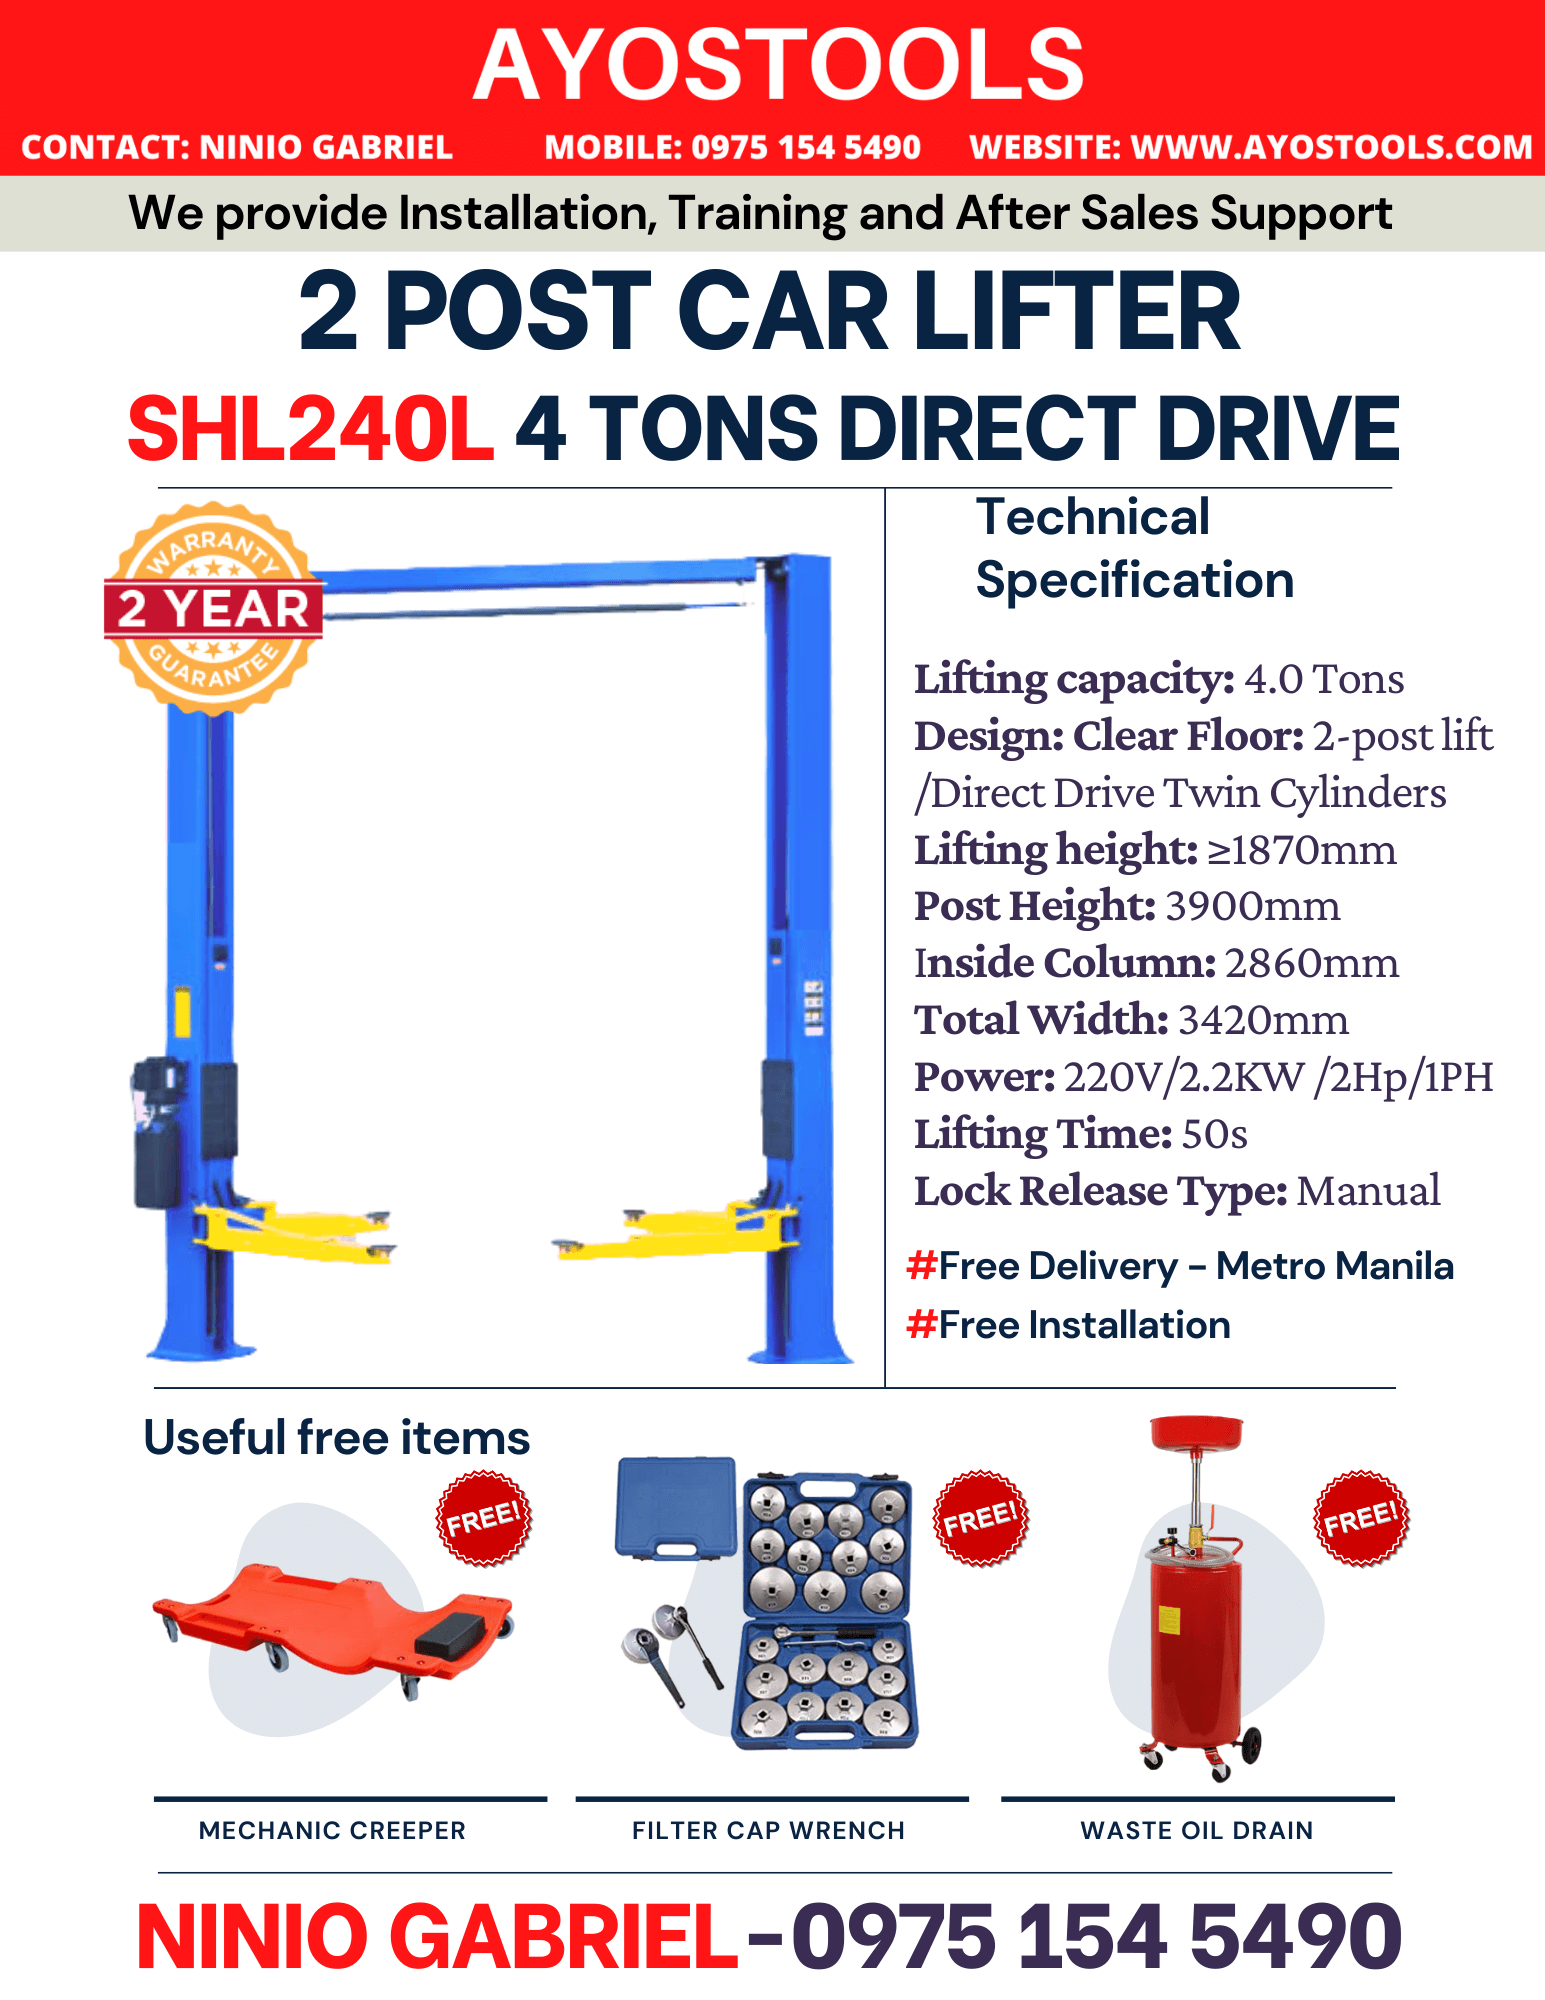 4 Tons Direct Drive 2 Post Car Lifter Dealer in the Philippines